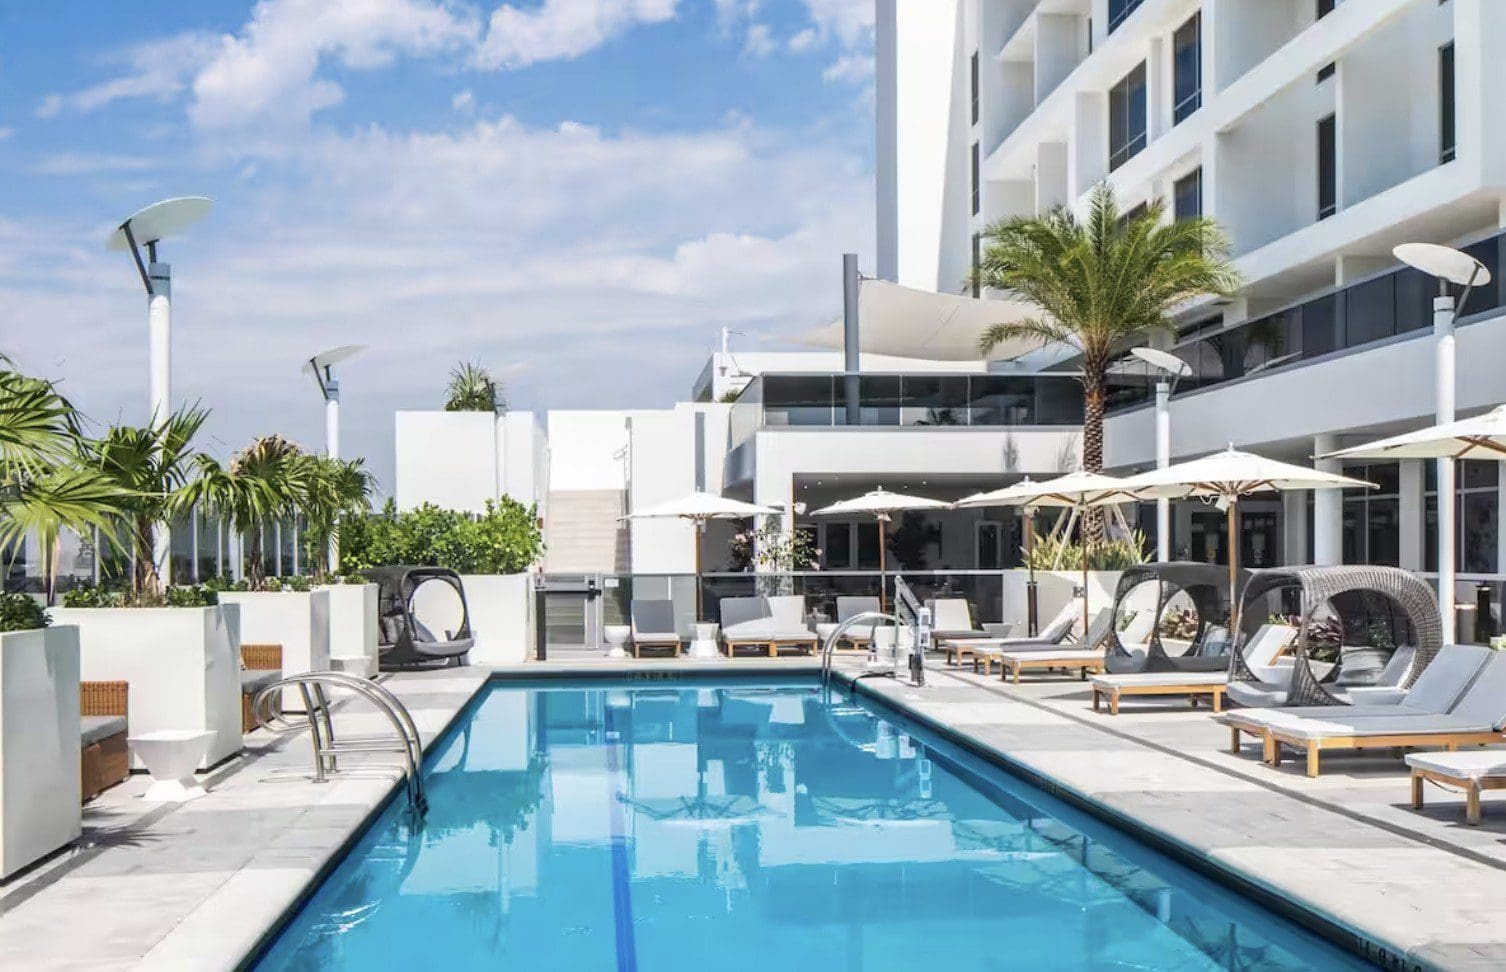 Hilton Aventura Miami with a big swimming pool with white tables